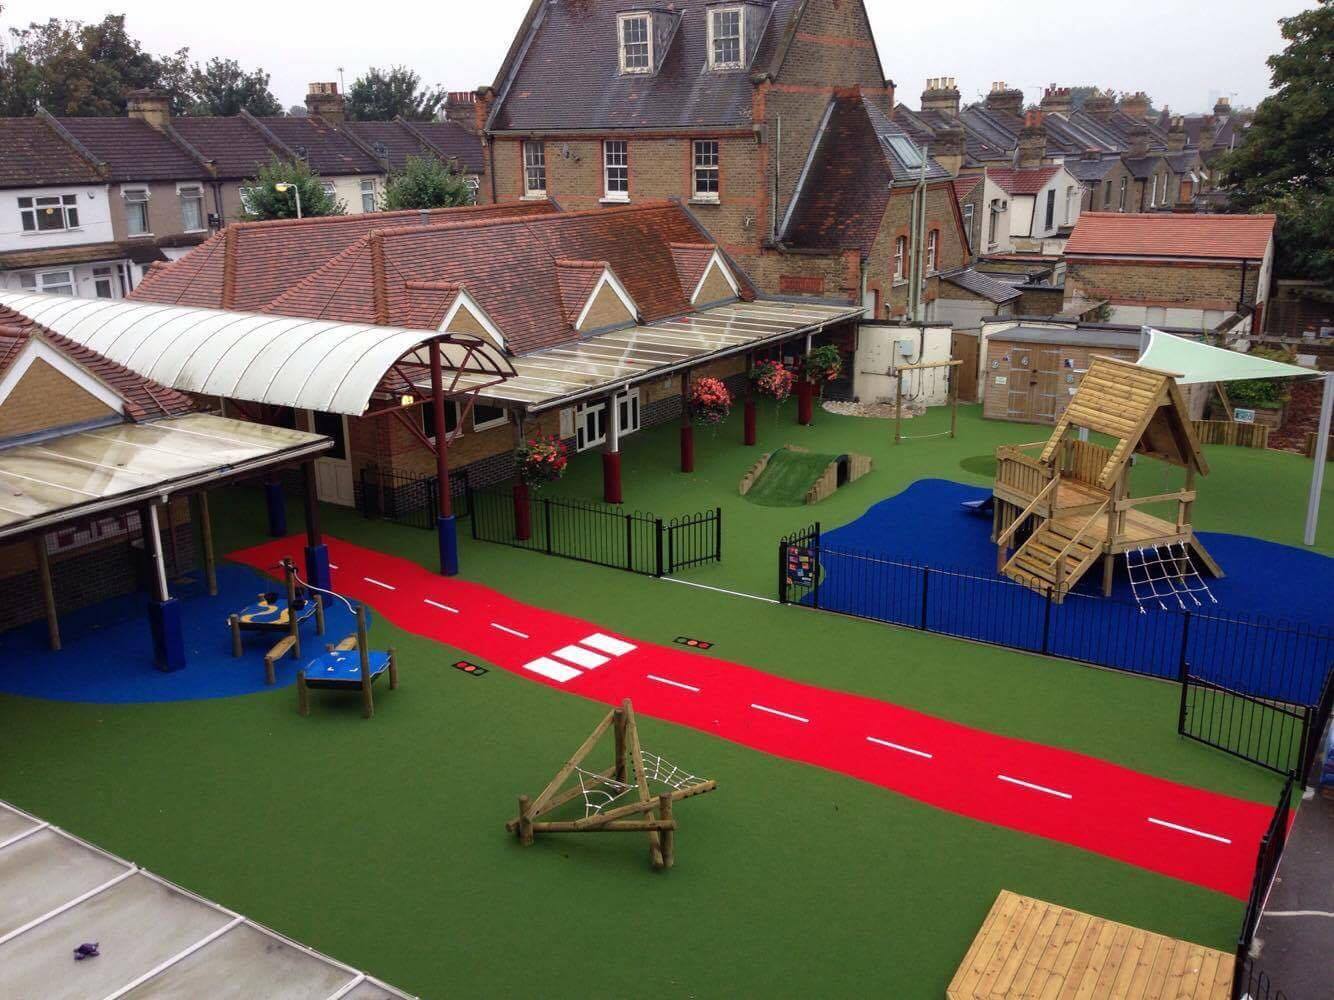 overhead view of green artificial grass playground with play area and blue and red markings